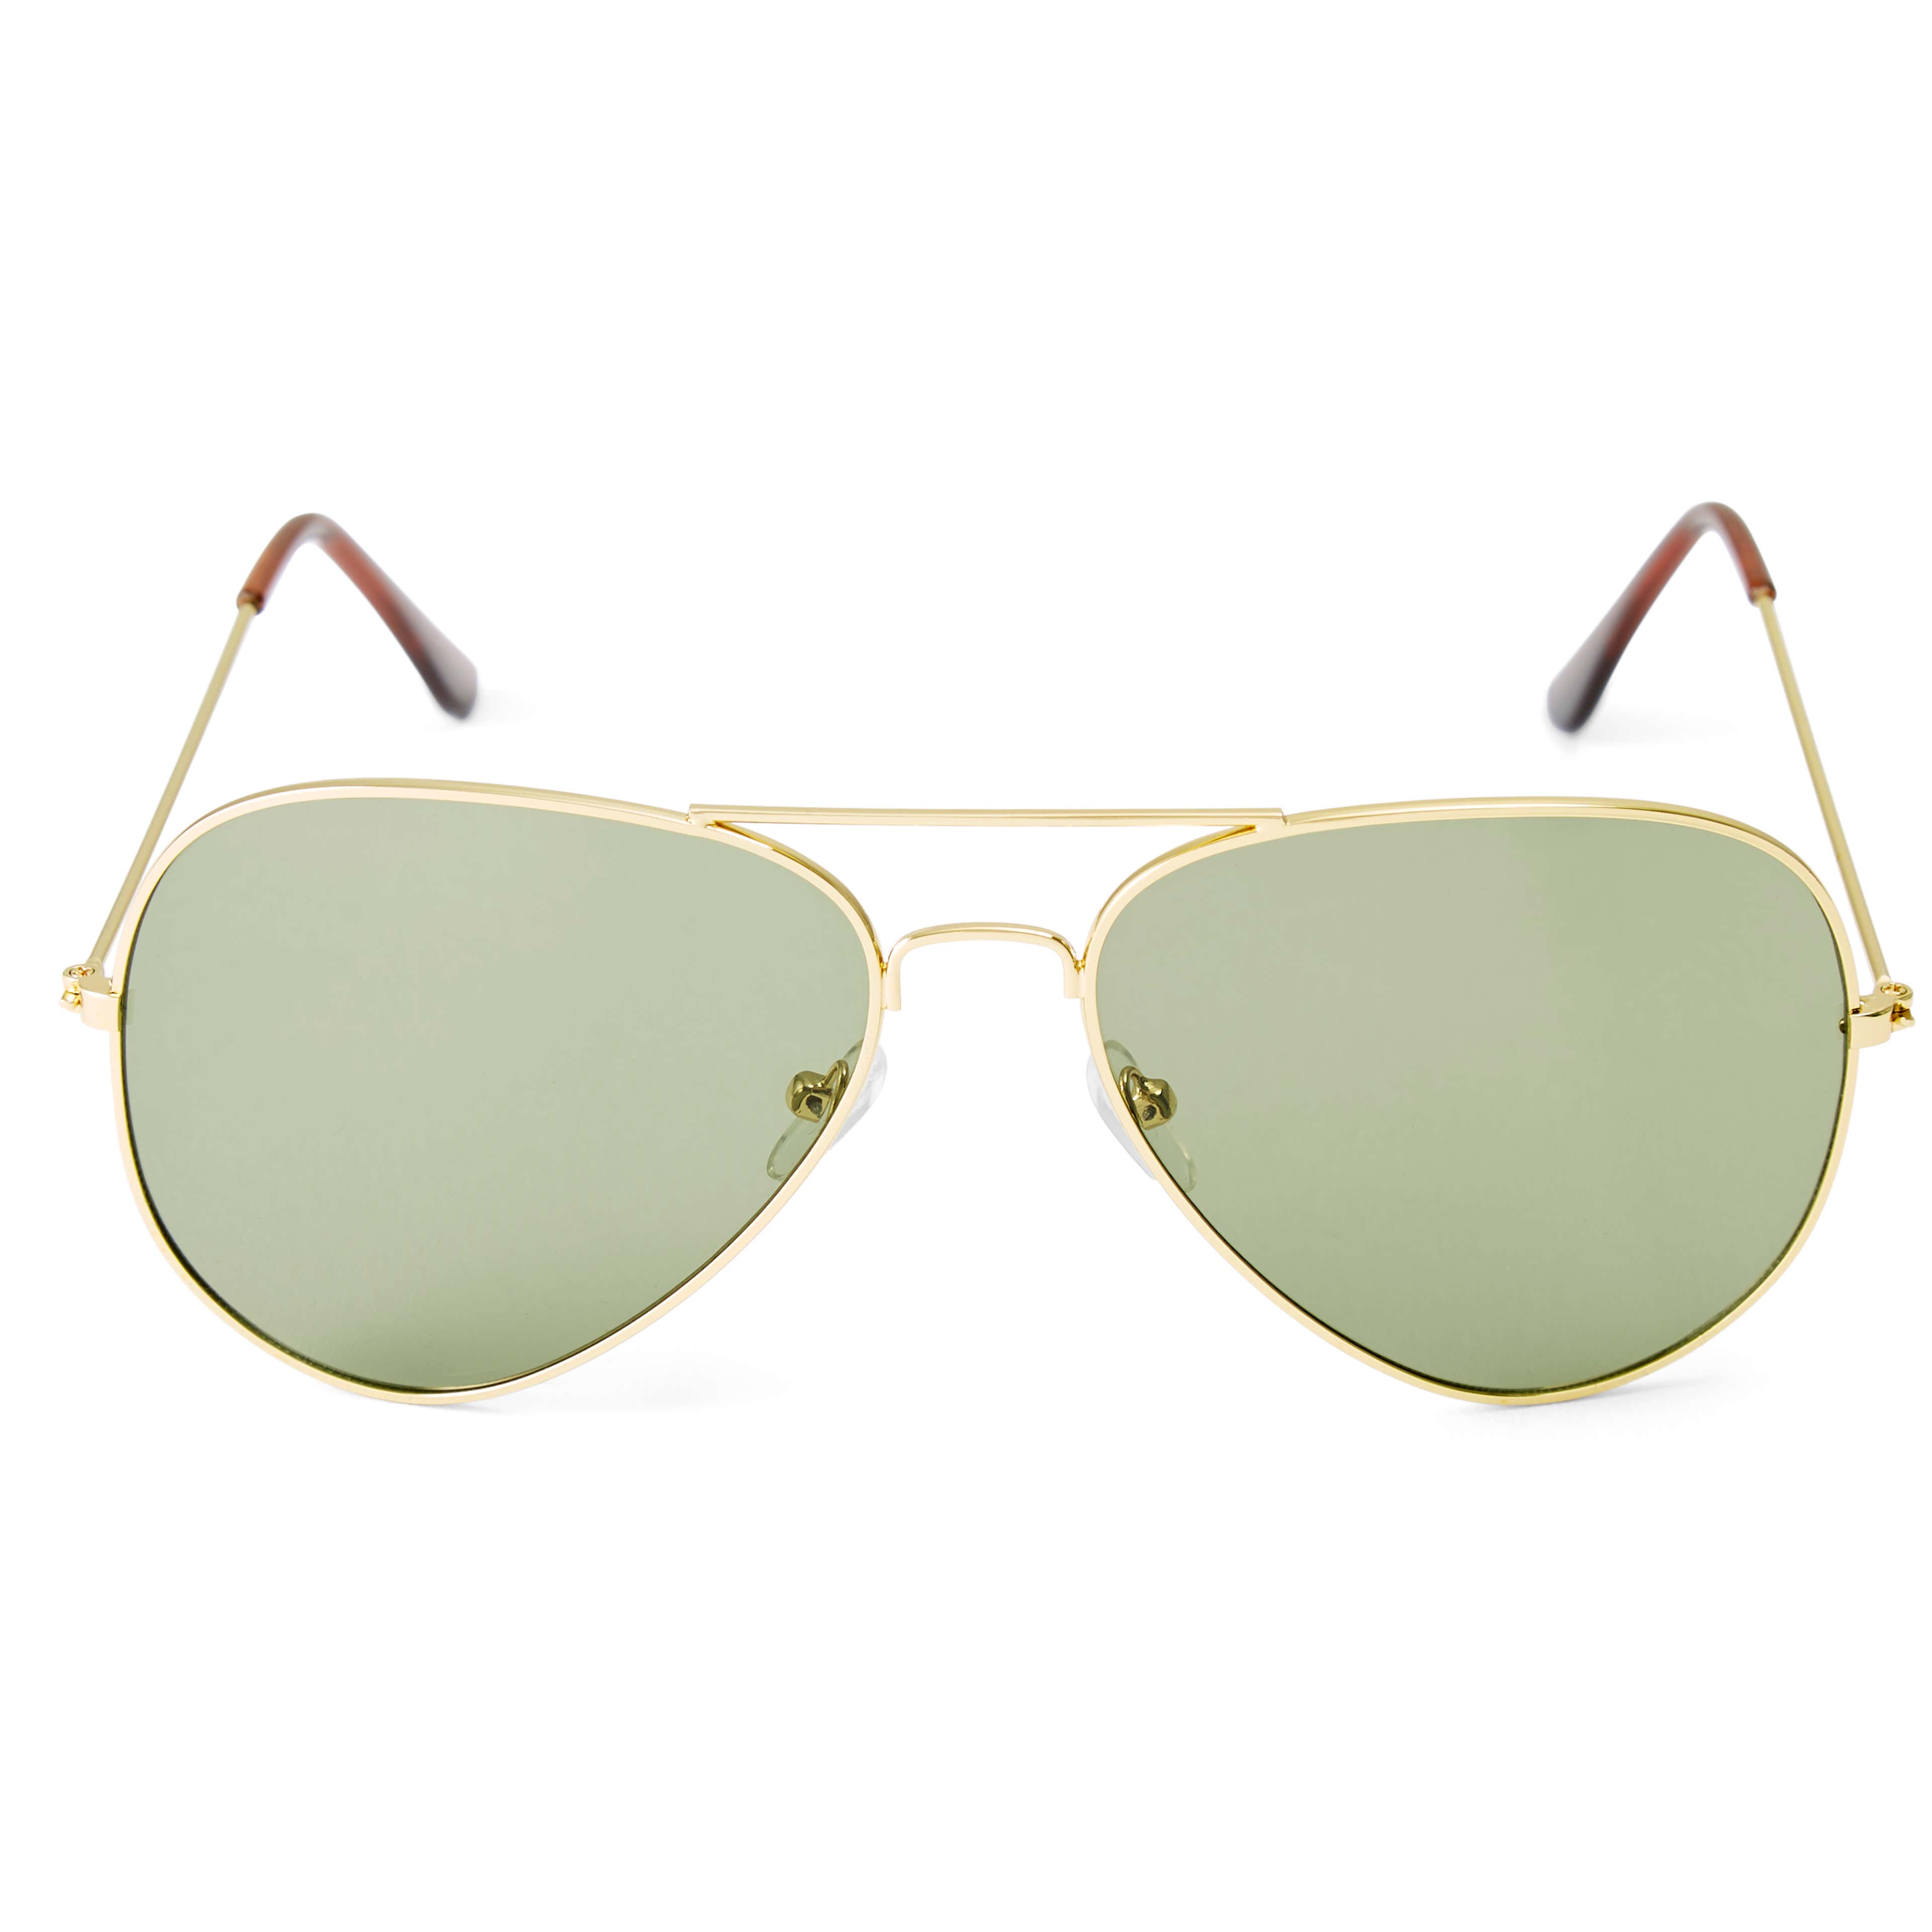 Gold-Tone & Green Aviators - 2 - hover gallery